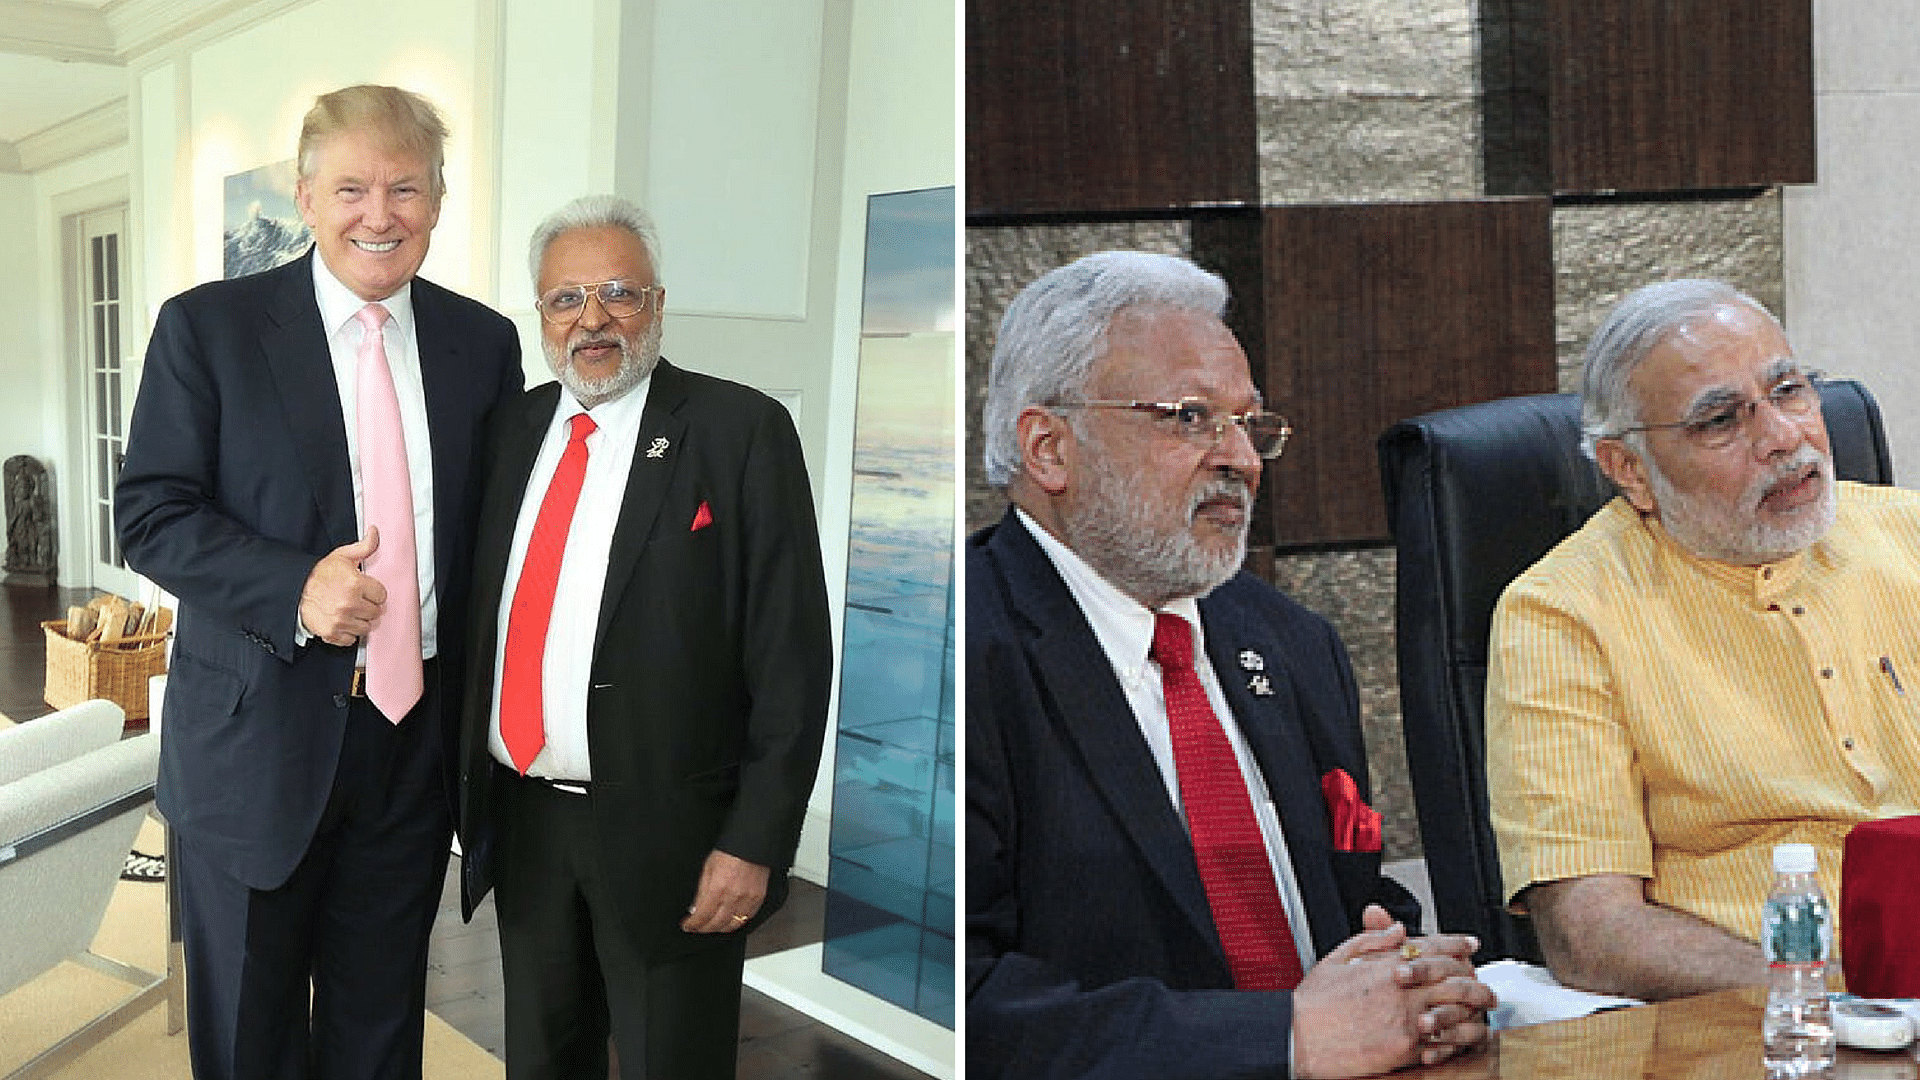 Shalabh Kumar donated USD 898,000 to Trumps Victory Fund and led a campaign for the PM Modi in 2014. (Photo Courtesy: <a href="https://twitter.com/iamshalabhkumar/status/753842958156181504">Twitter/Shalabh Kumar</a>, <a href="http://www.narendramodi.in/gujarat-cm-confers-with-ex-speaker-in-us-congress-of-american-republican-party-over-skype-5199">www.narendramodi.in</a>)